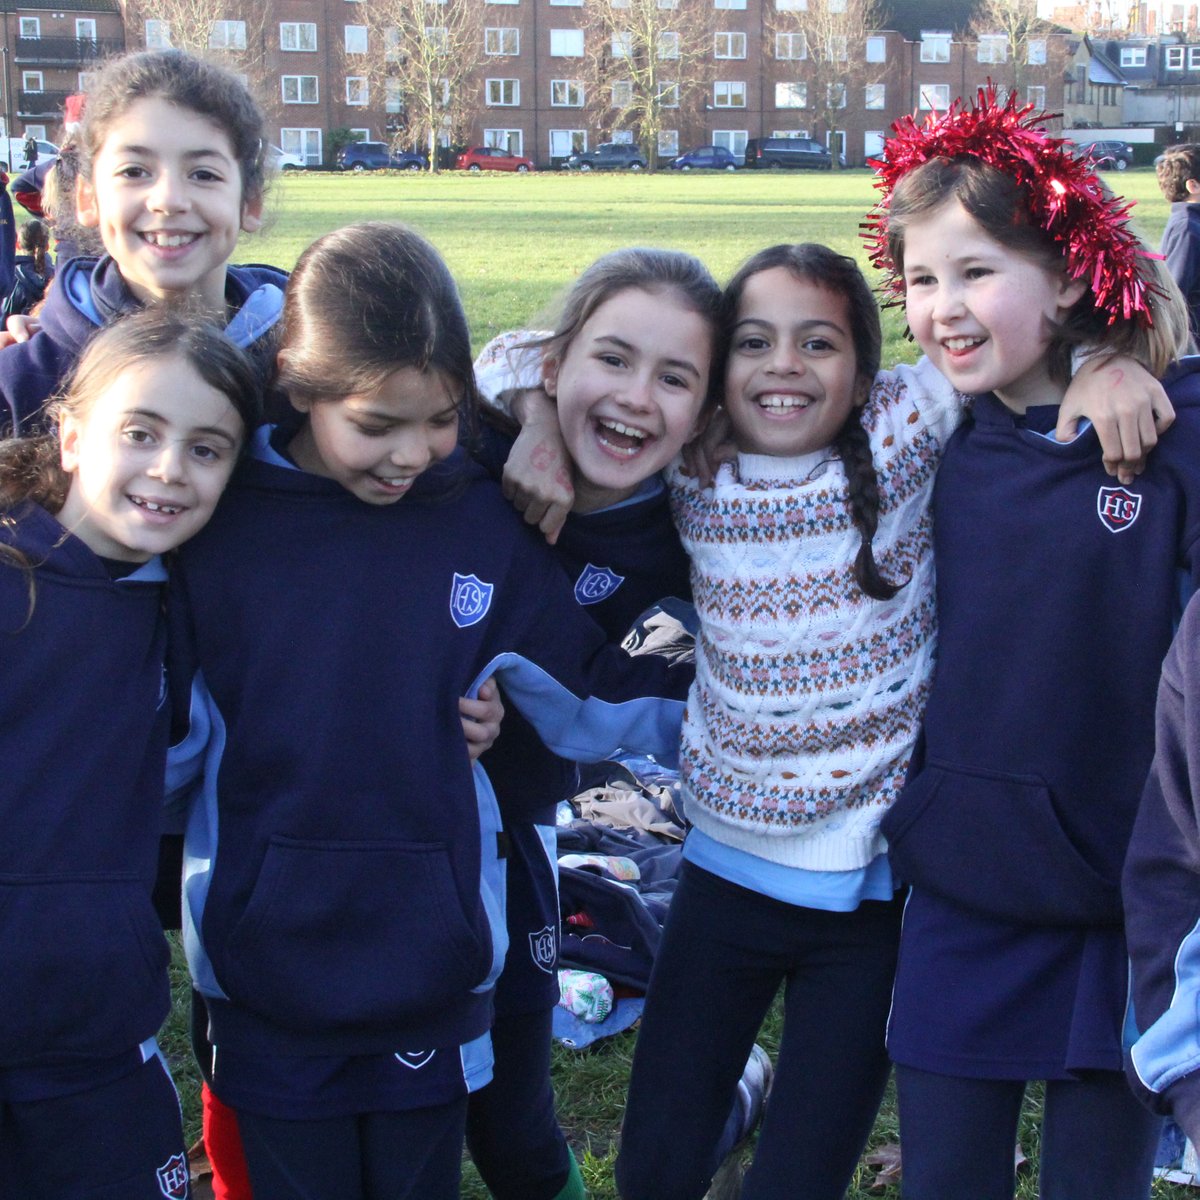 What a festive way to start the day! This morning, pupils from OHS and @cbppschool took part in one of our favourite annual events - the #festive fun run! Thank you to all the teachers that helped on the day and to the parents who were able to join us and cheer the children on.